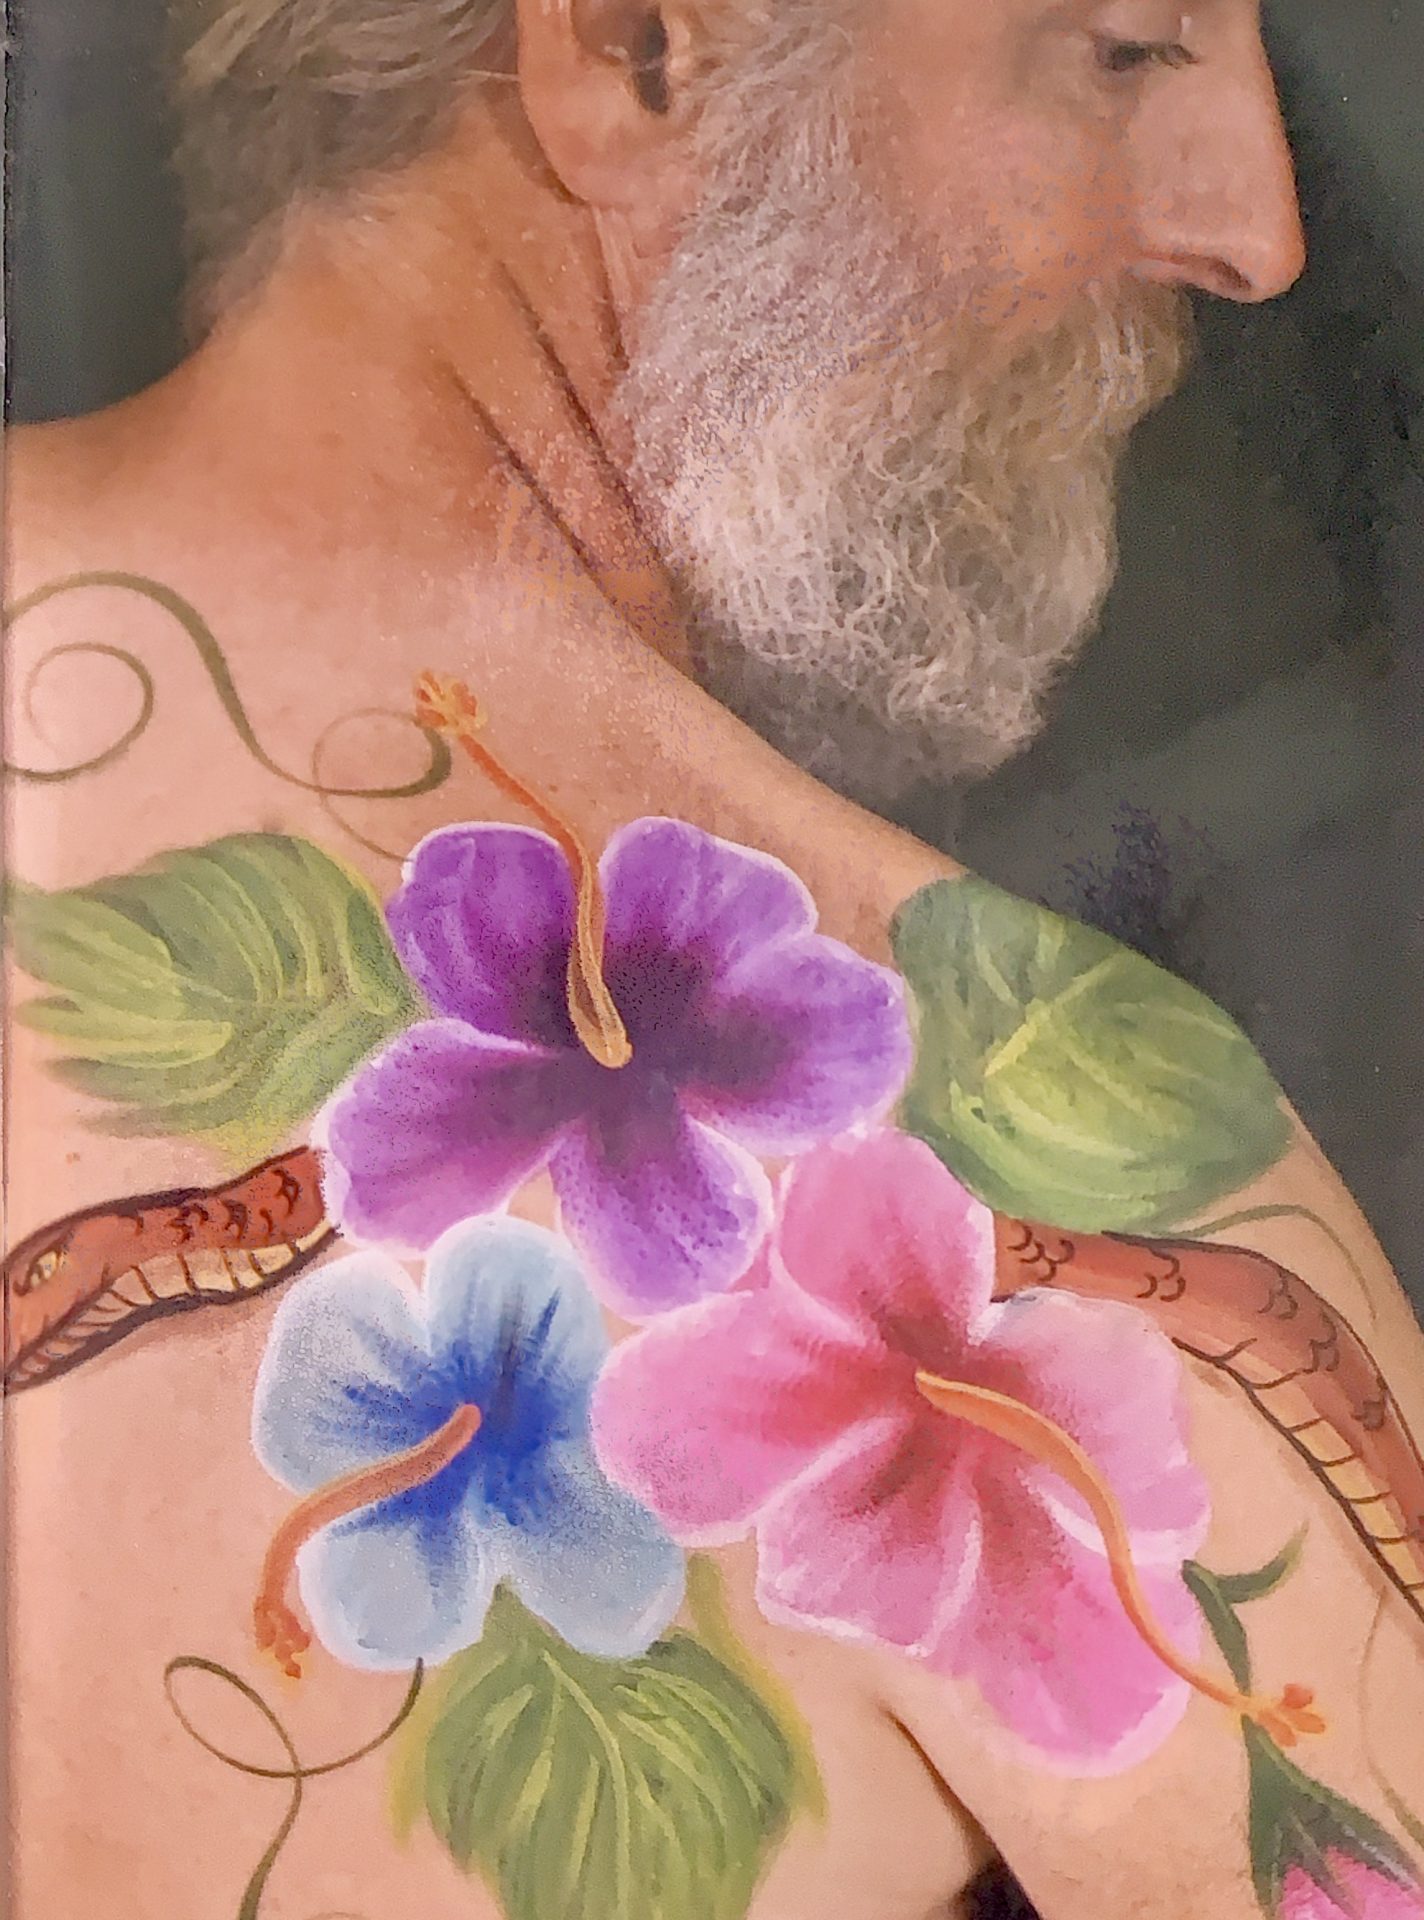 One of Dave’s favorite pictures of himself. Art by professional body painter Susan McNeely